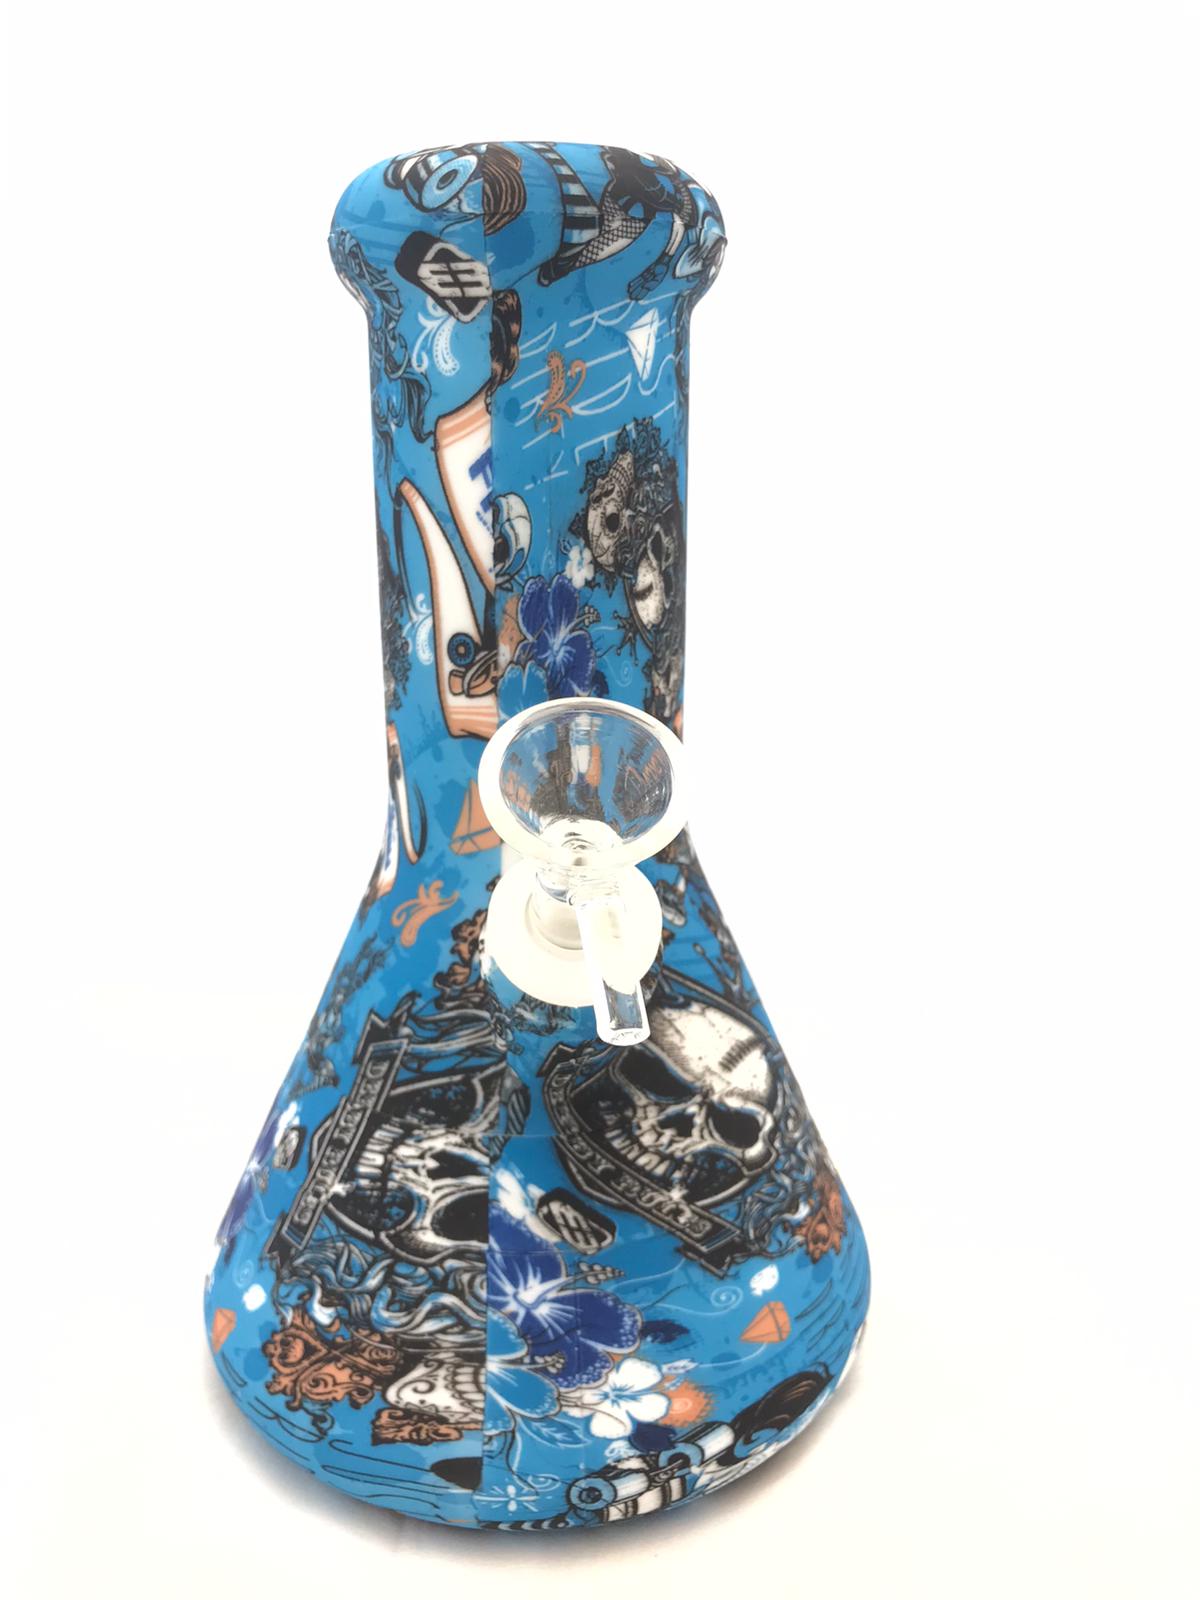 Silicon classic lab bong printed 10" Size BLUE SKULL